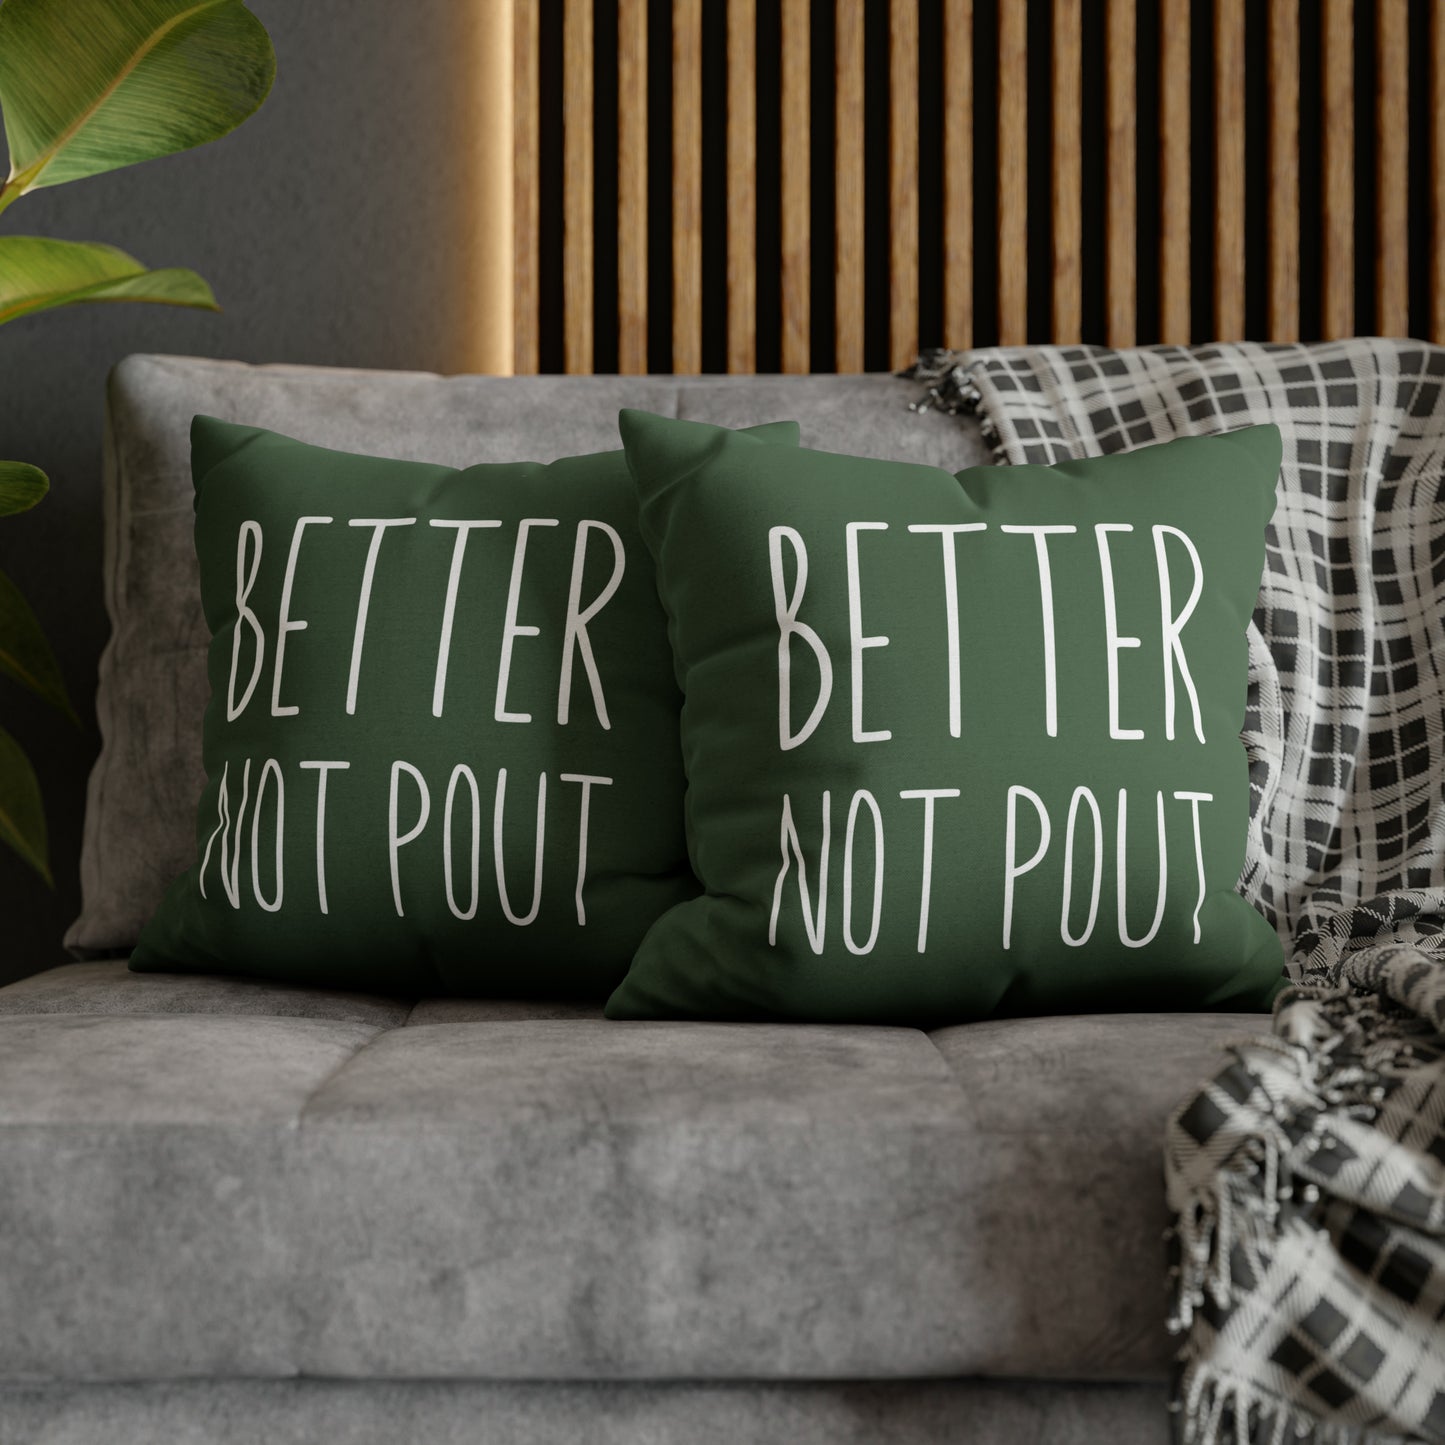 "Better Not Pout" Christmas Pillow Cover, Green